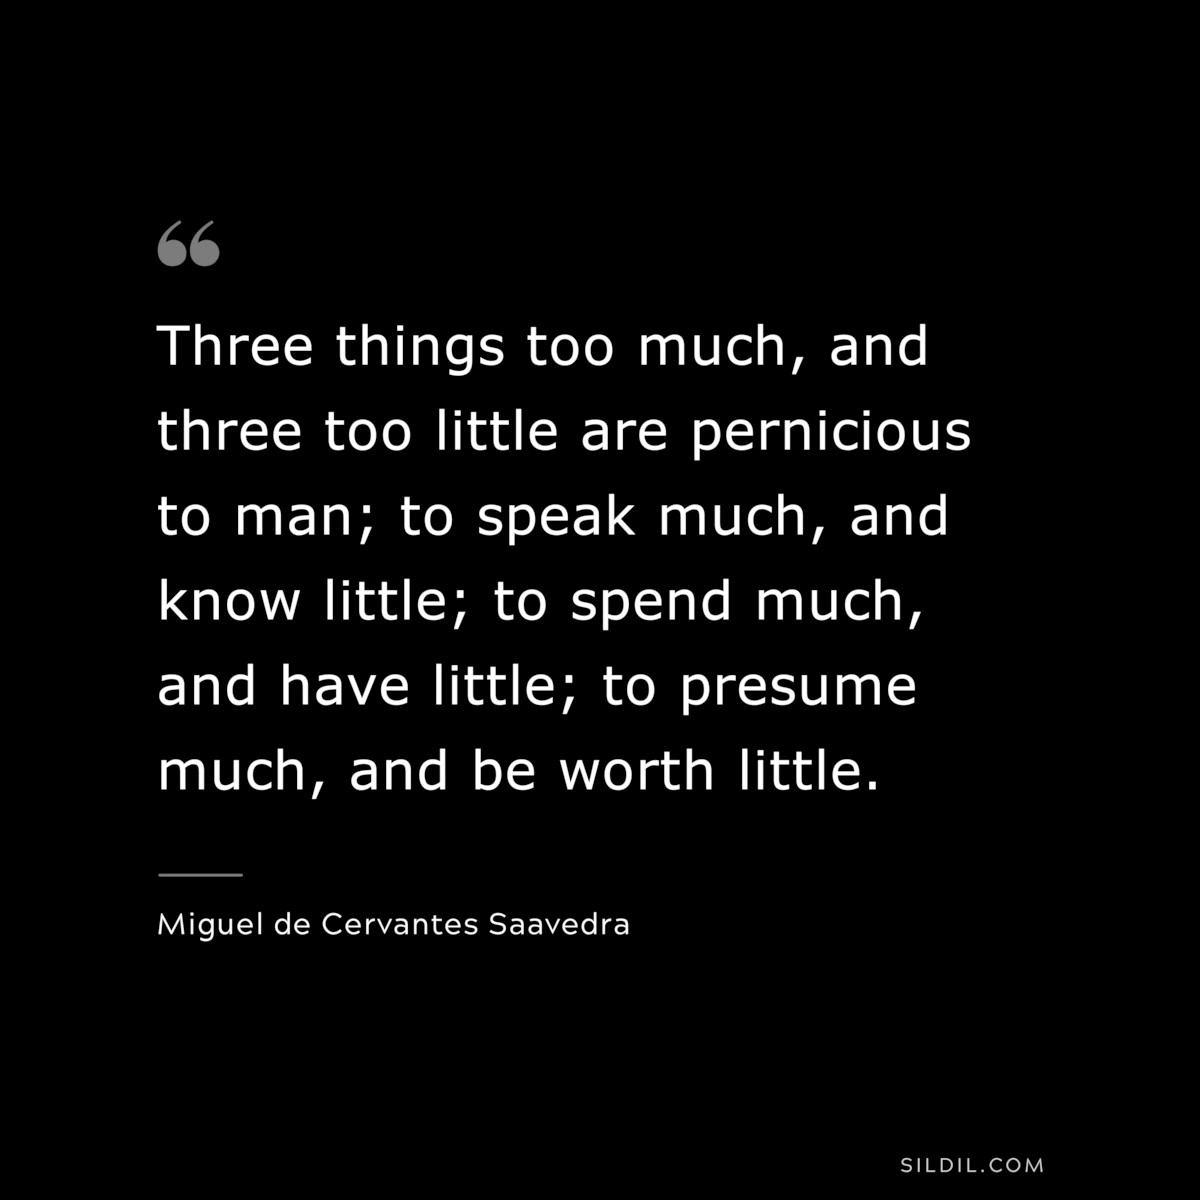 Three things too much, and three too little are pernicious to man; to speak much, and know little; to spend much, and have little; to presume much, and be worth little. ― Miguel de Cervantes Saavedra